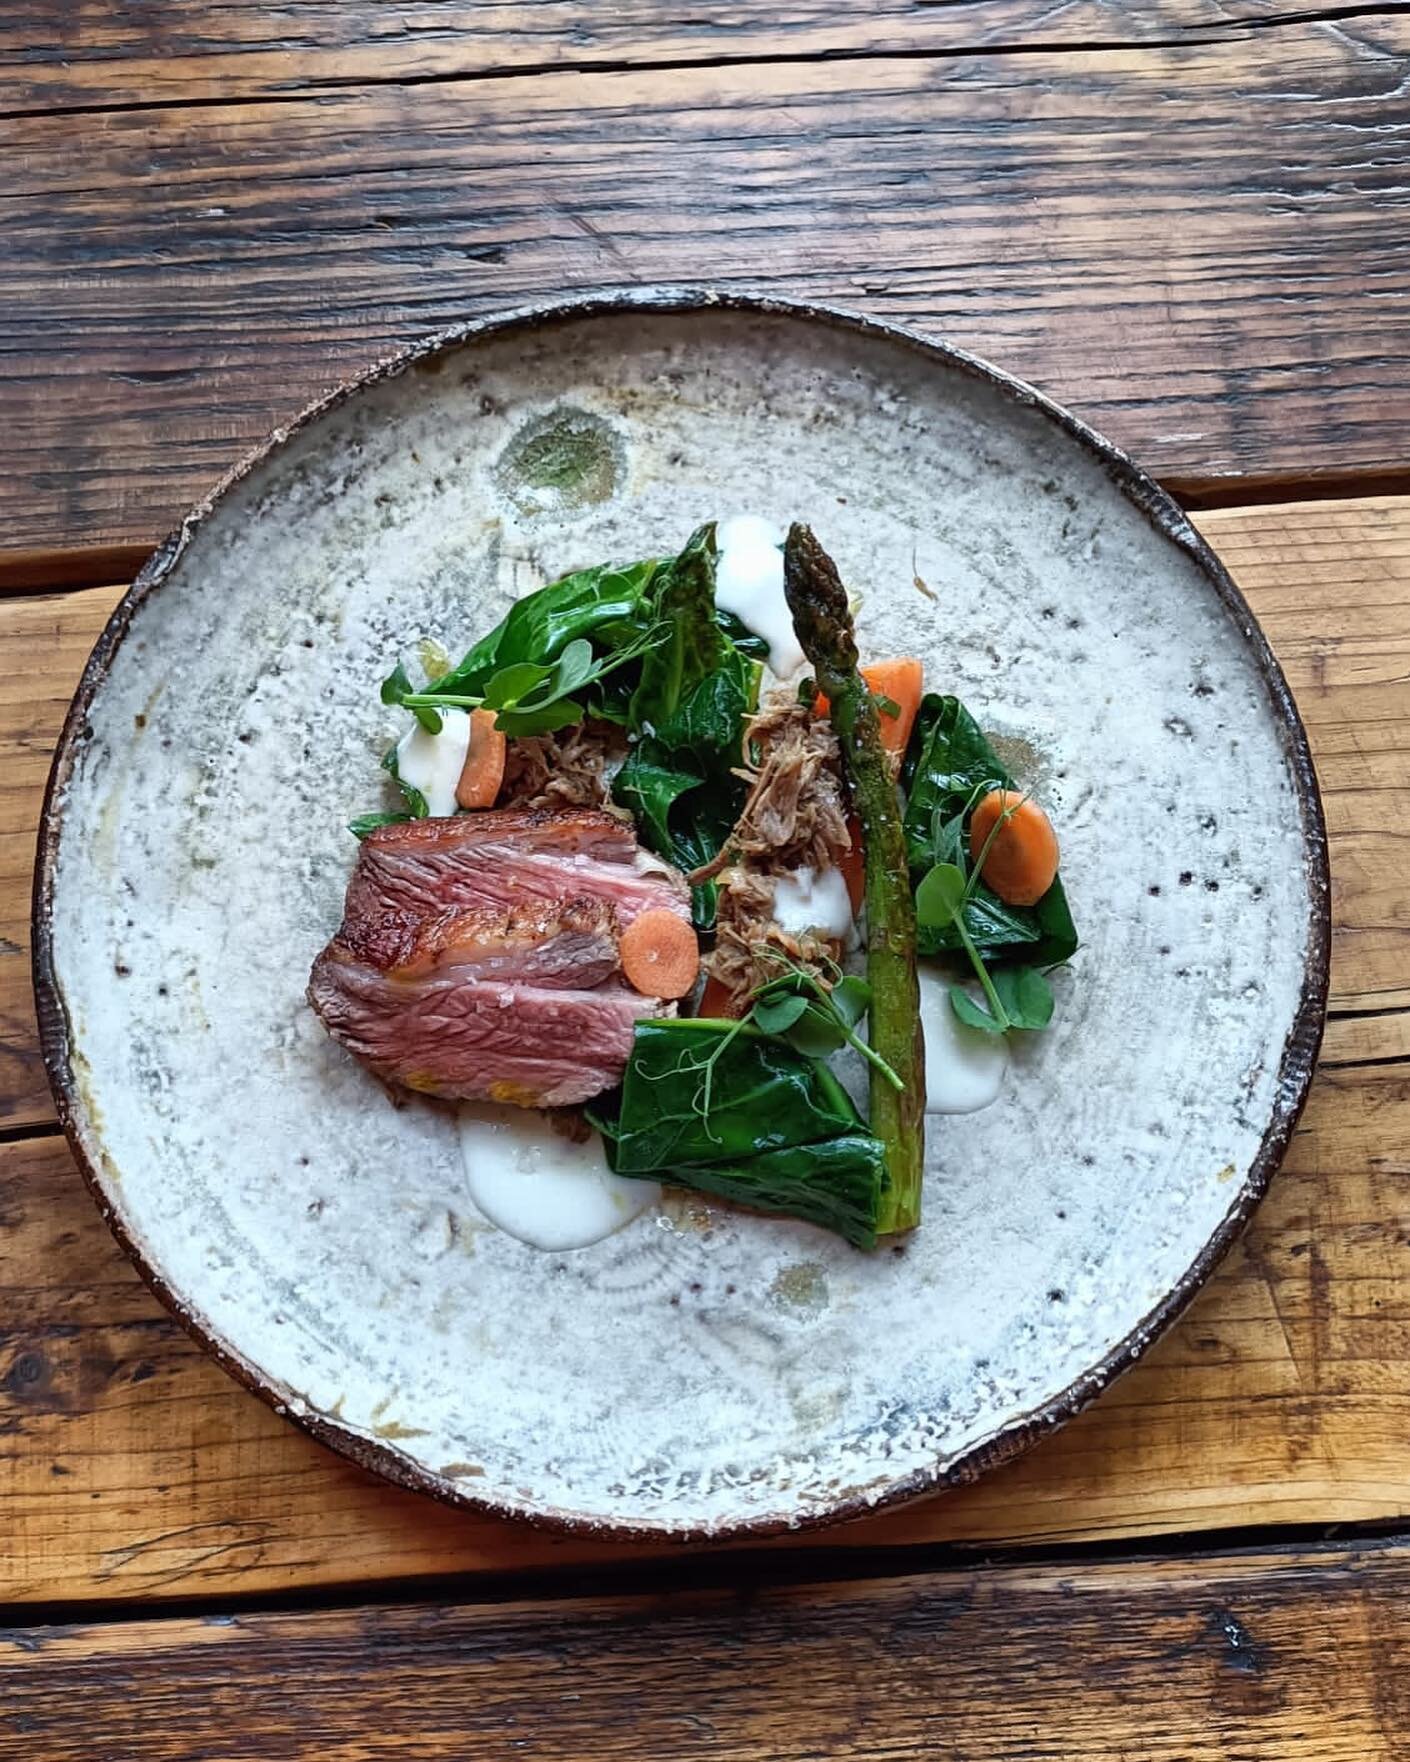 Lamb rumb, braised shoulder, confit carrot, spring greens, asparagus, sheep yoghurt.

Slow cooking is the way back to health. Slow food. 

Creating food with slow methods allows space and time for beneficial bacteria&rsquo;s to settle and get to work